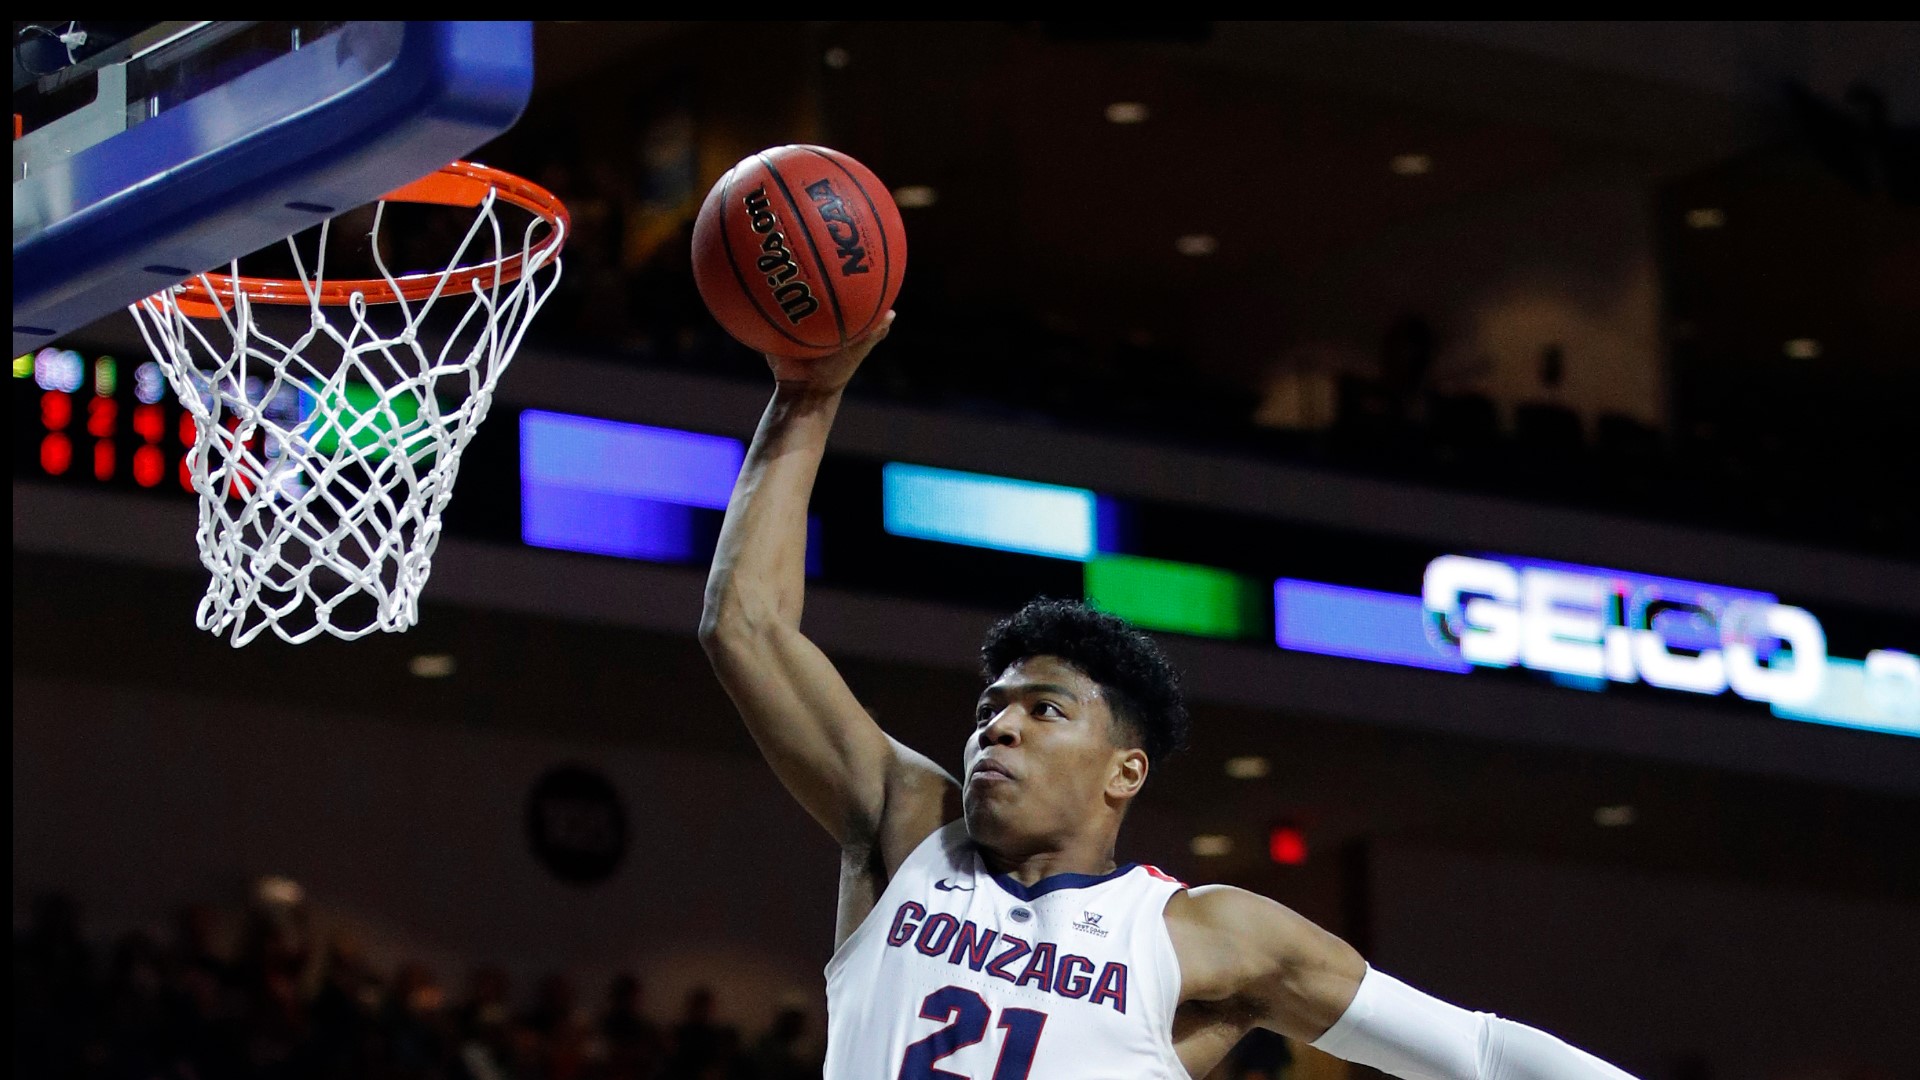 The Zags biggest concern of whether they will get a one seed might come down to head to head headaches against Tennessee and North Carolina.